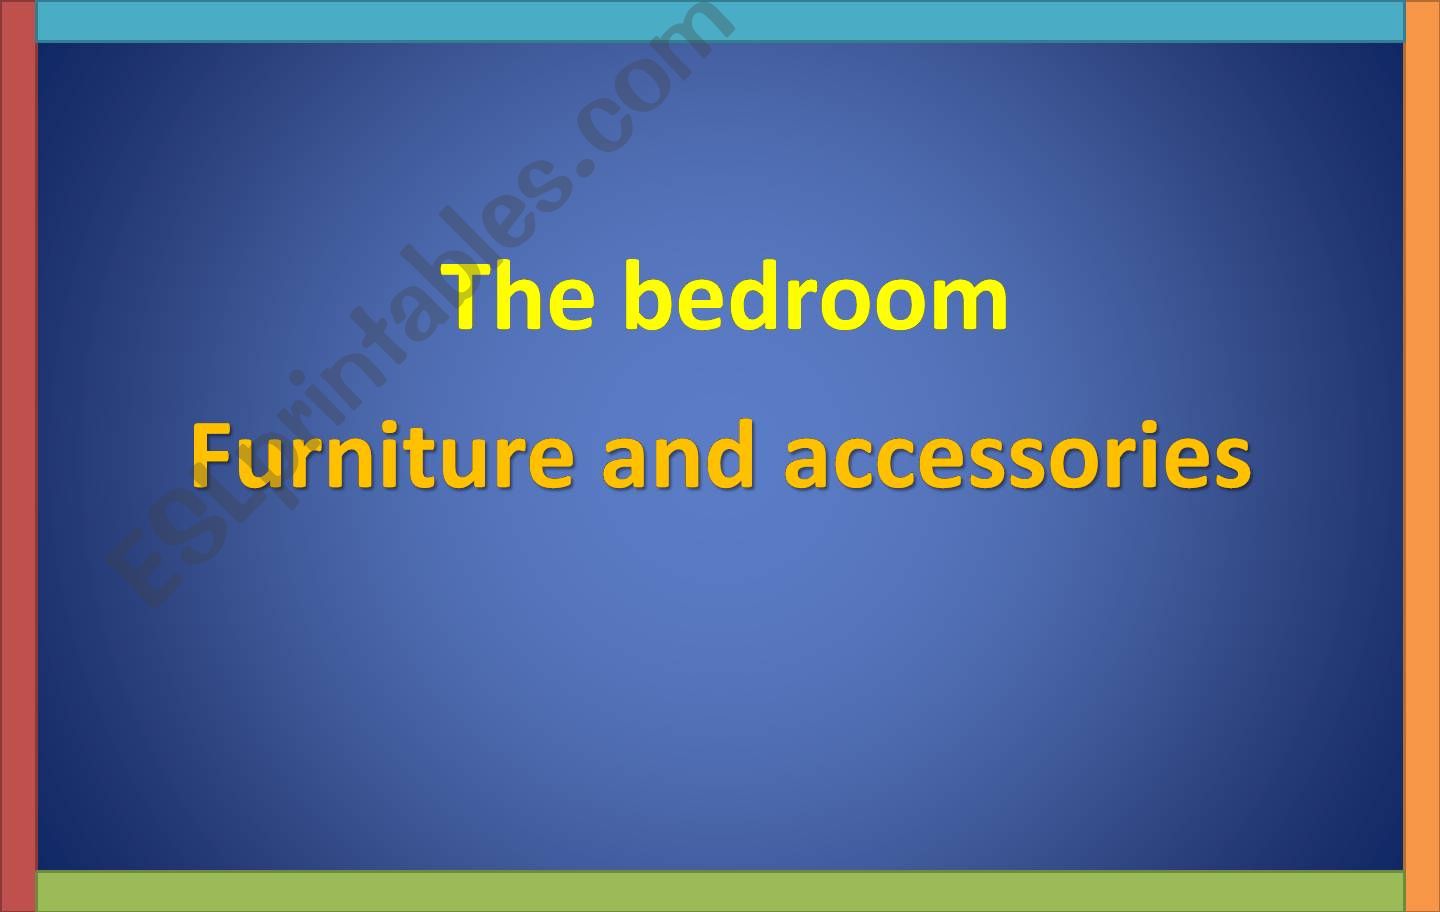 The bedroom furniture and accessories